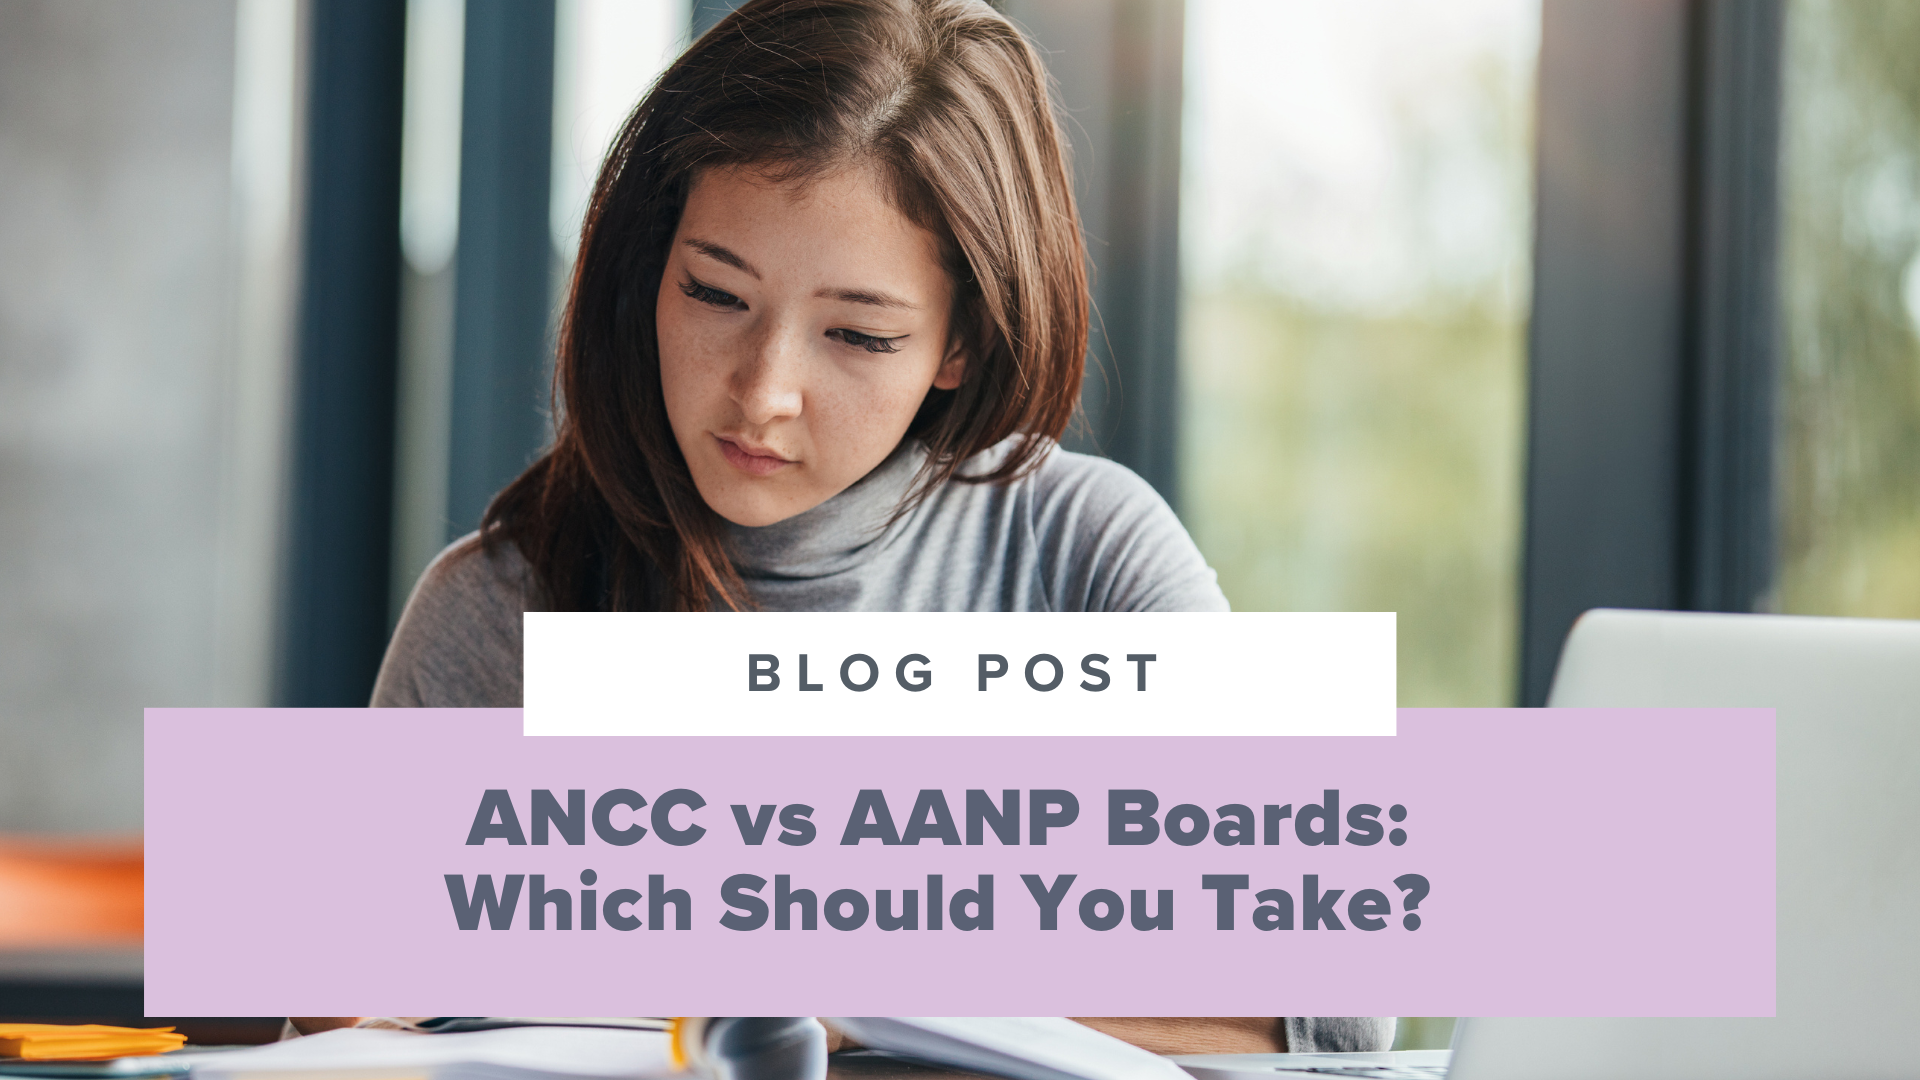 SMNP Blog - ANCC vs AANP Boards for FNP and AGPCNP: Which Should You Take?